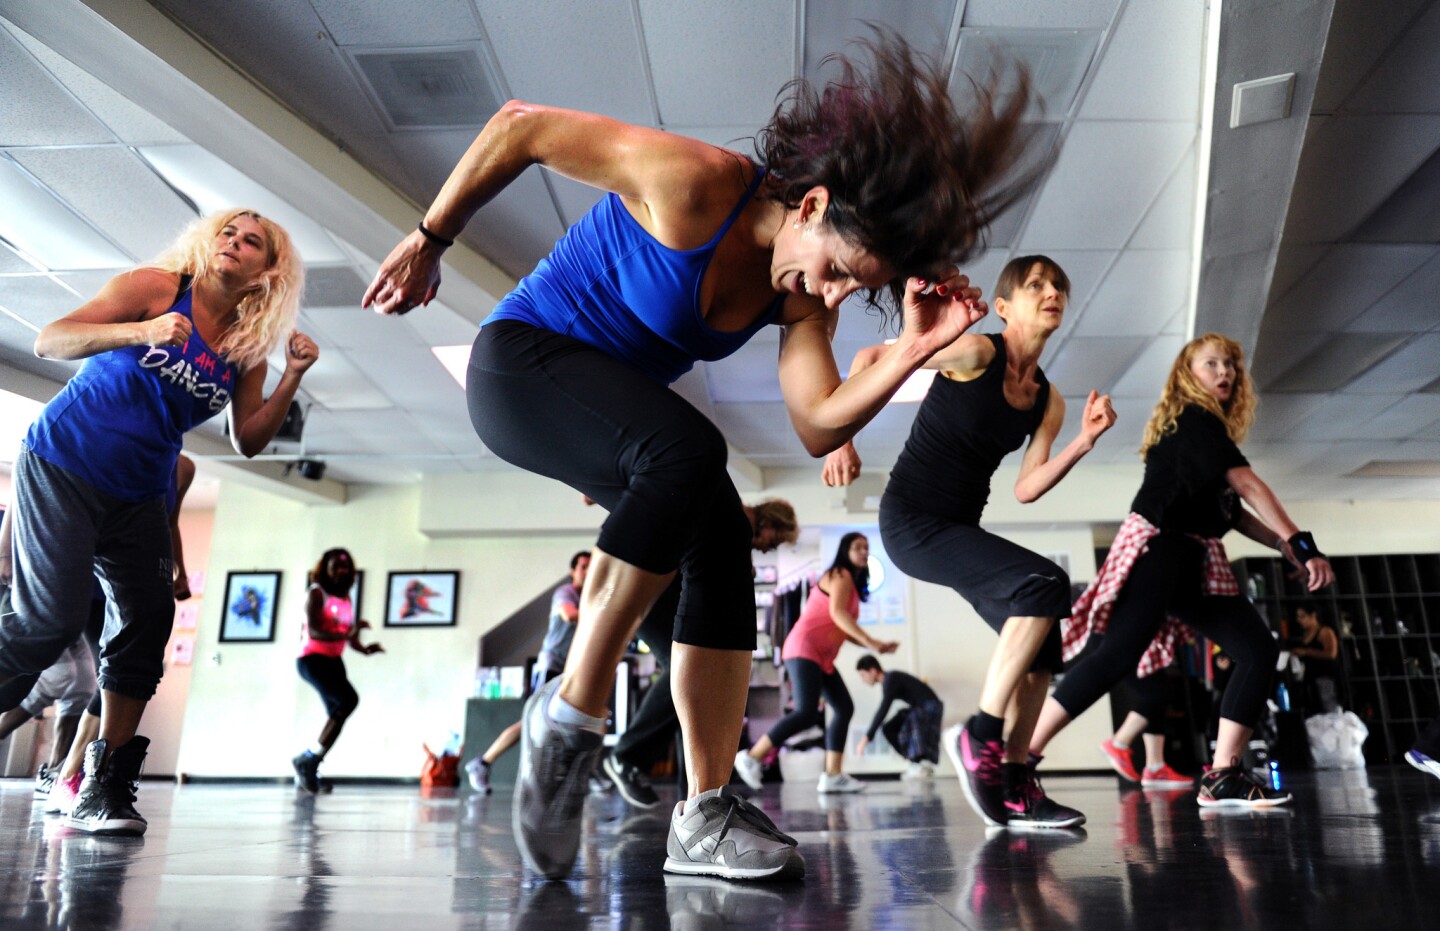 Ilyse Baker leads a dance workout class called Dancinerate at LA Dance Fit in West Los Angeles.